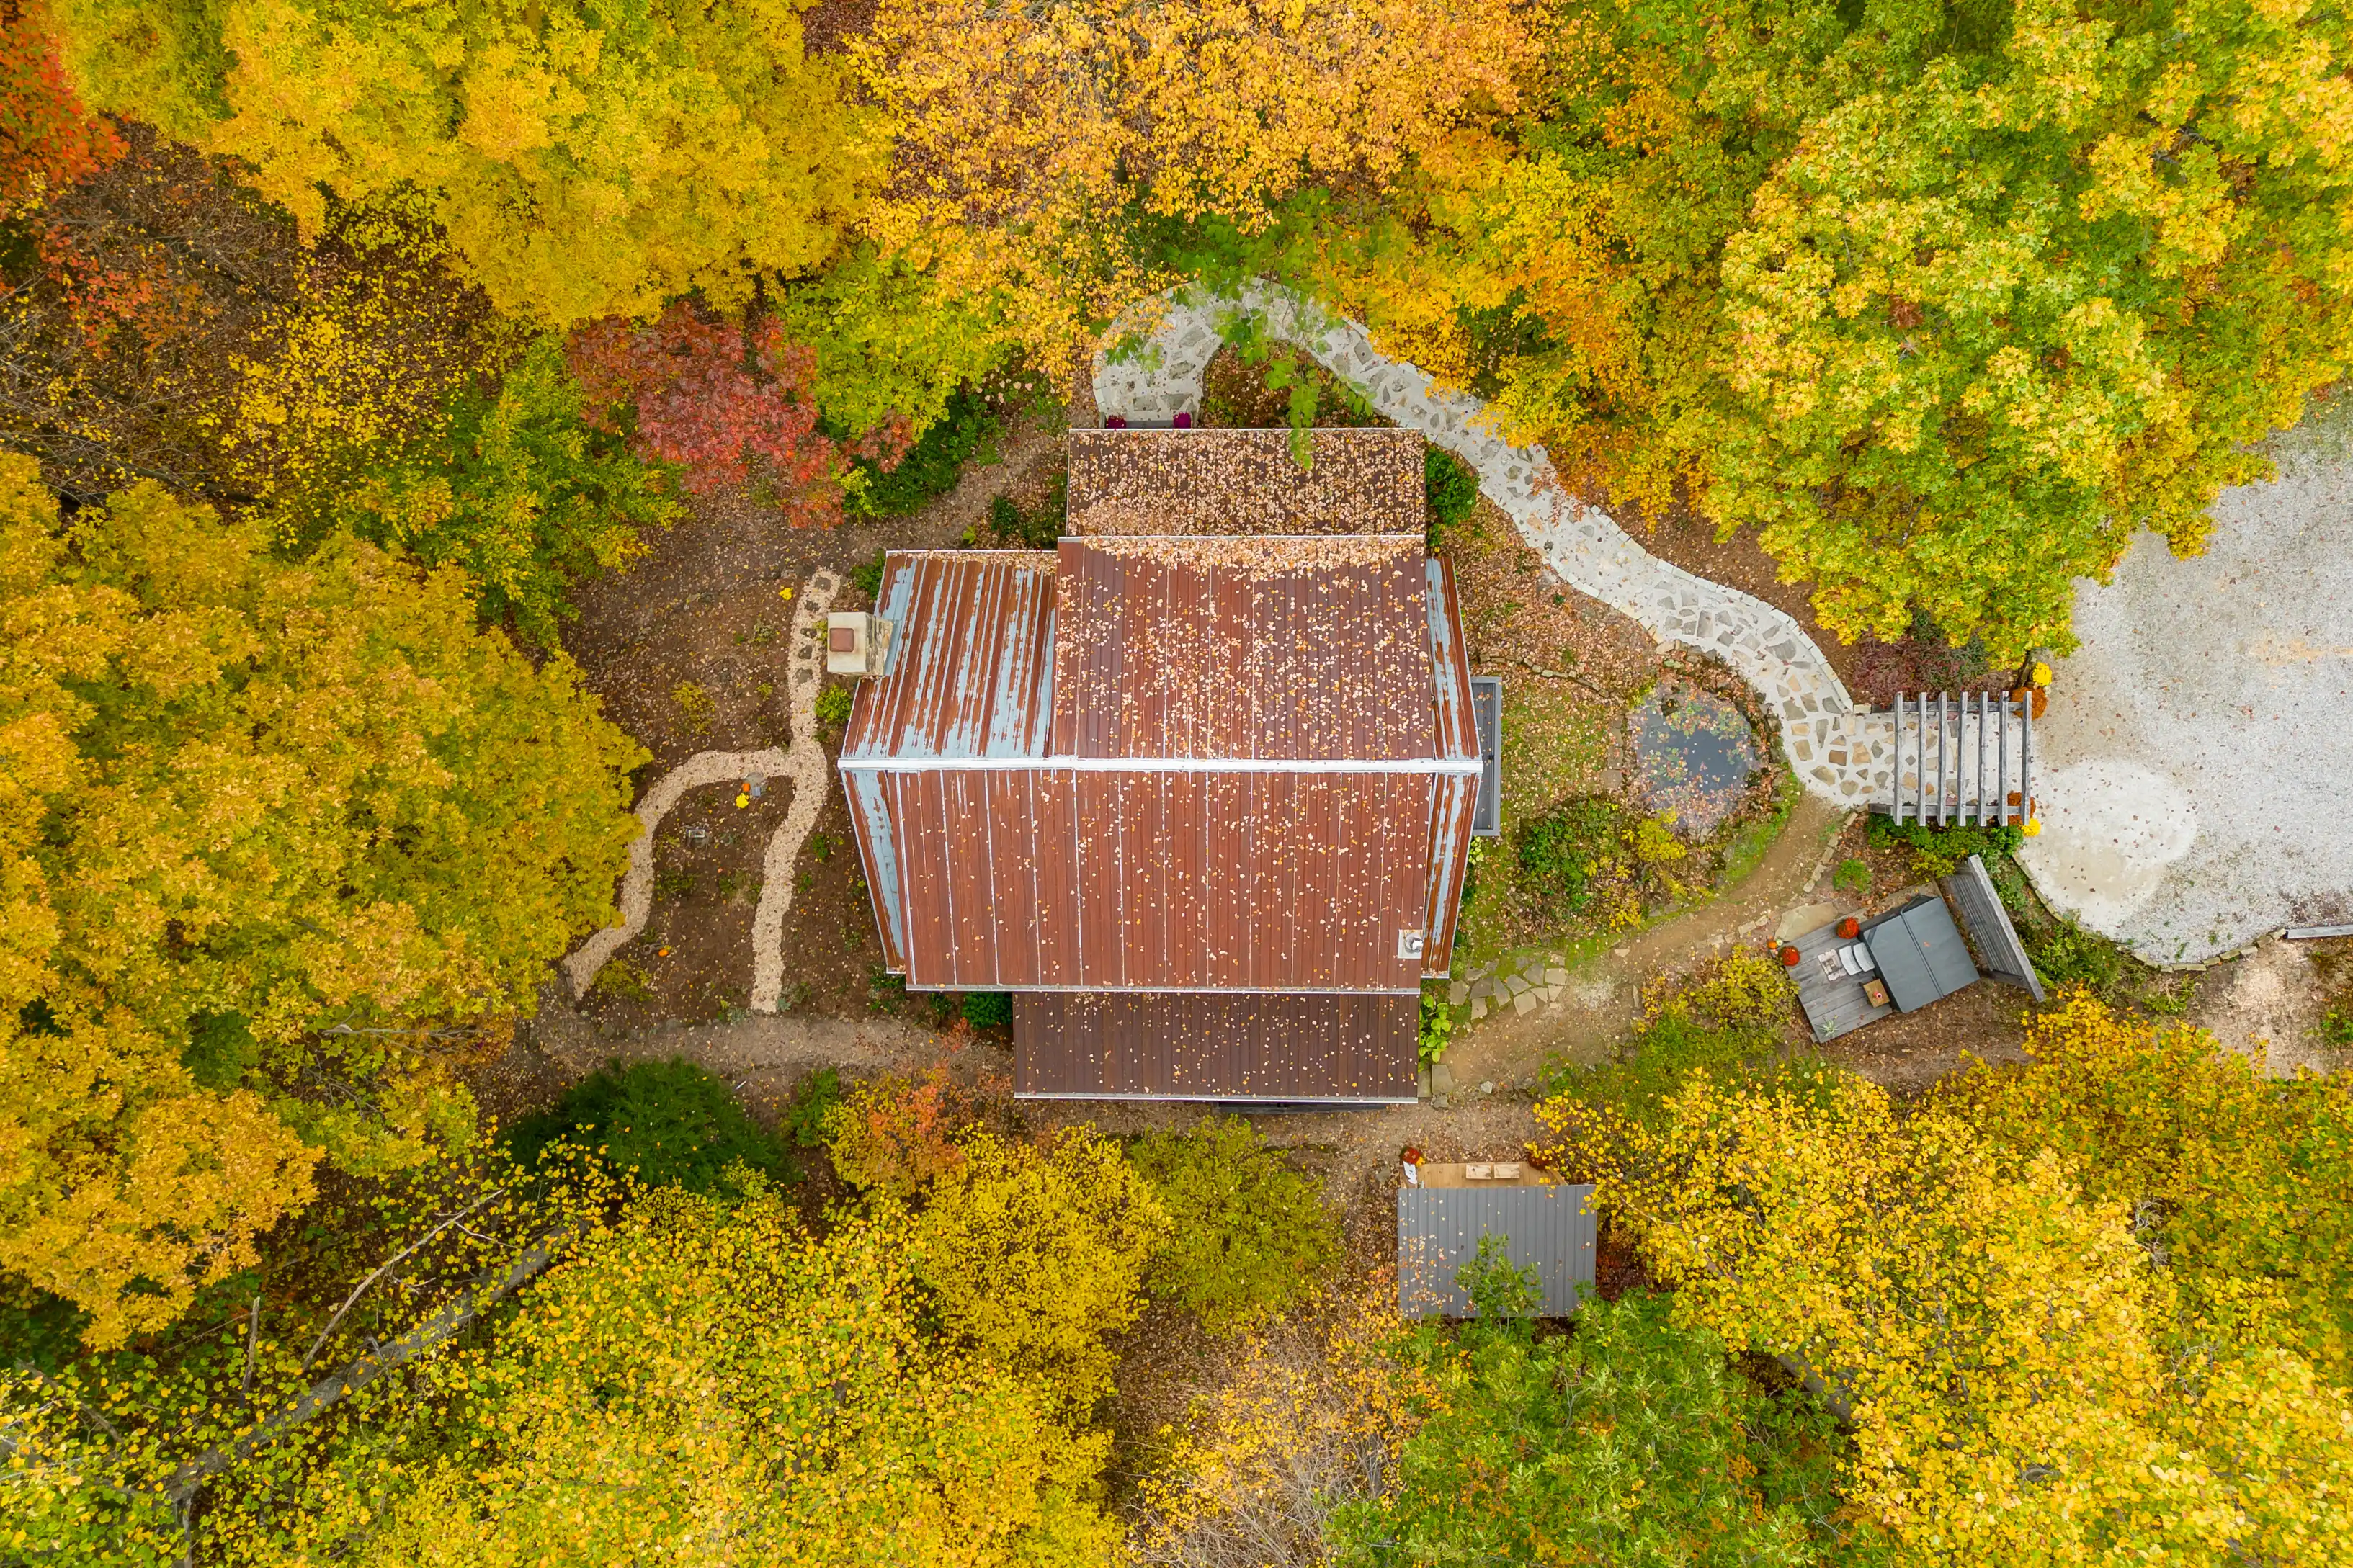 Aerial view of a rustic cabin surrounded by colorful autumn trees with a winding path and a small clearing.